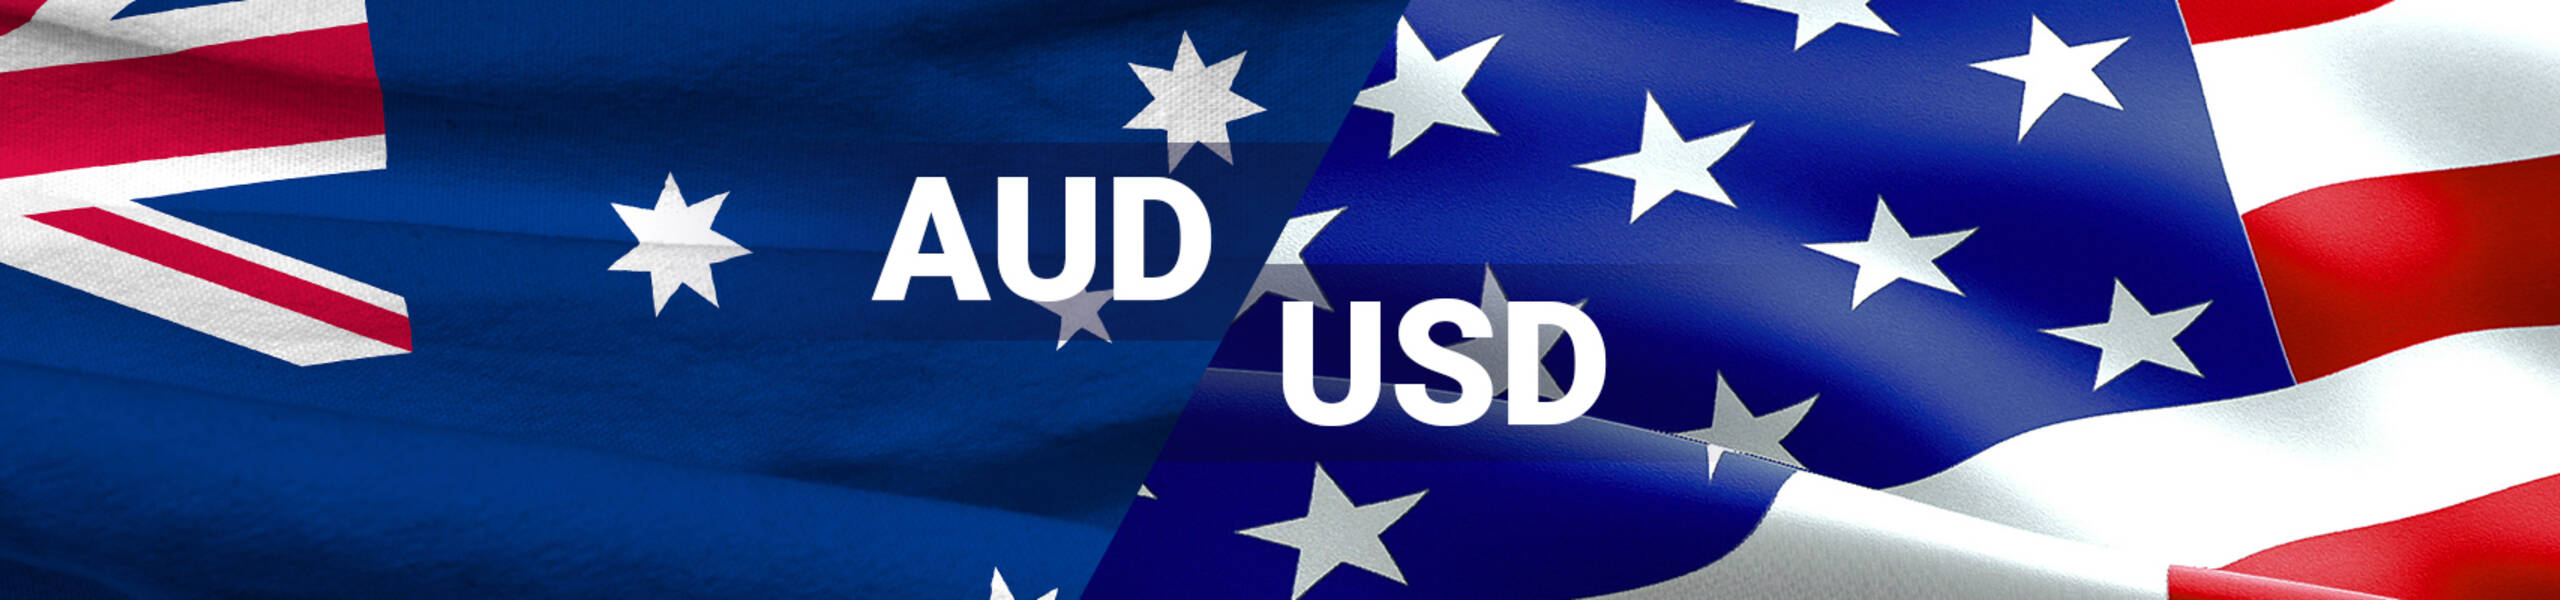 AUD/USD: bulls have lost a game